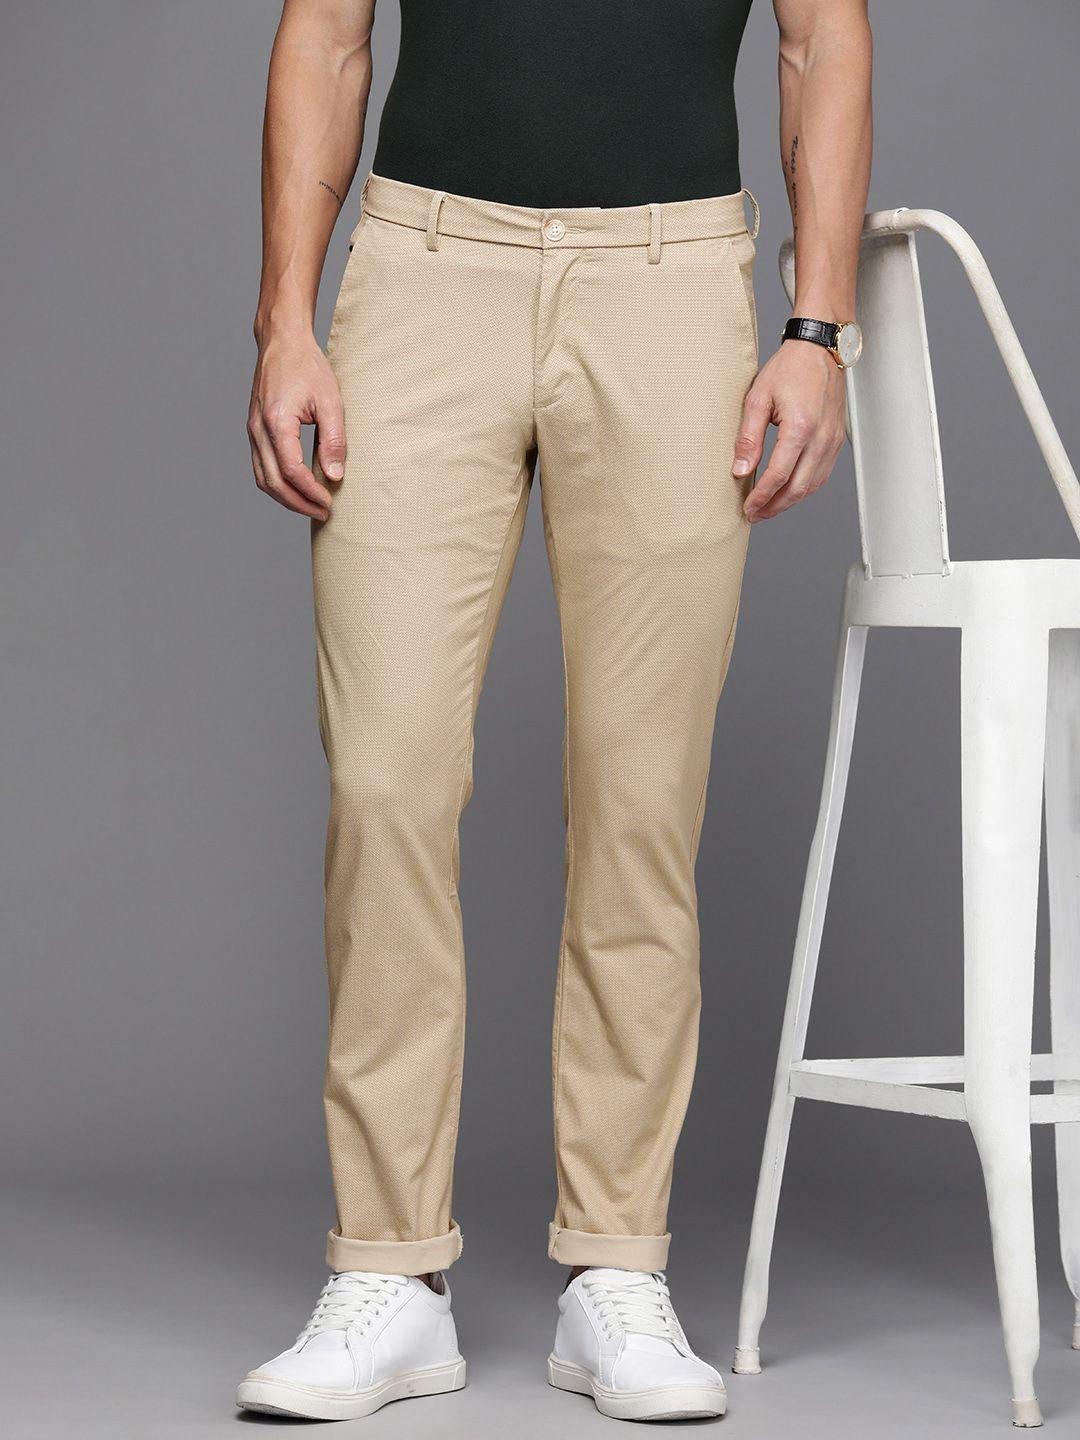 Allen Solly Men Printed Slim Fit Chinos Trousers